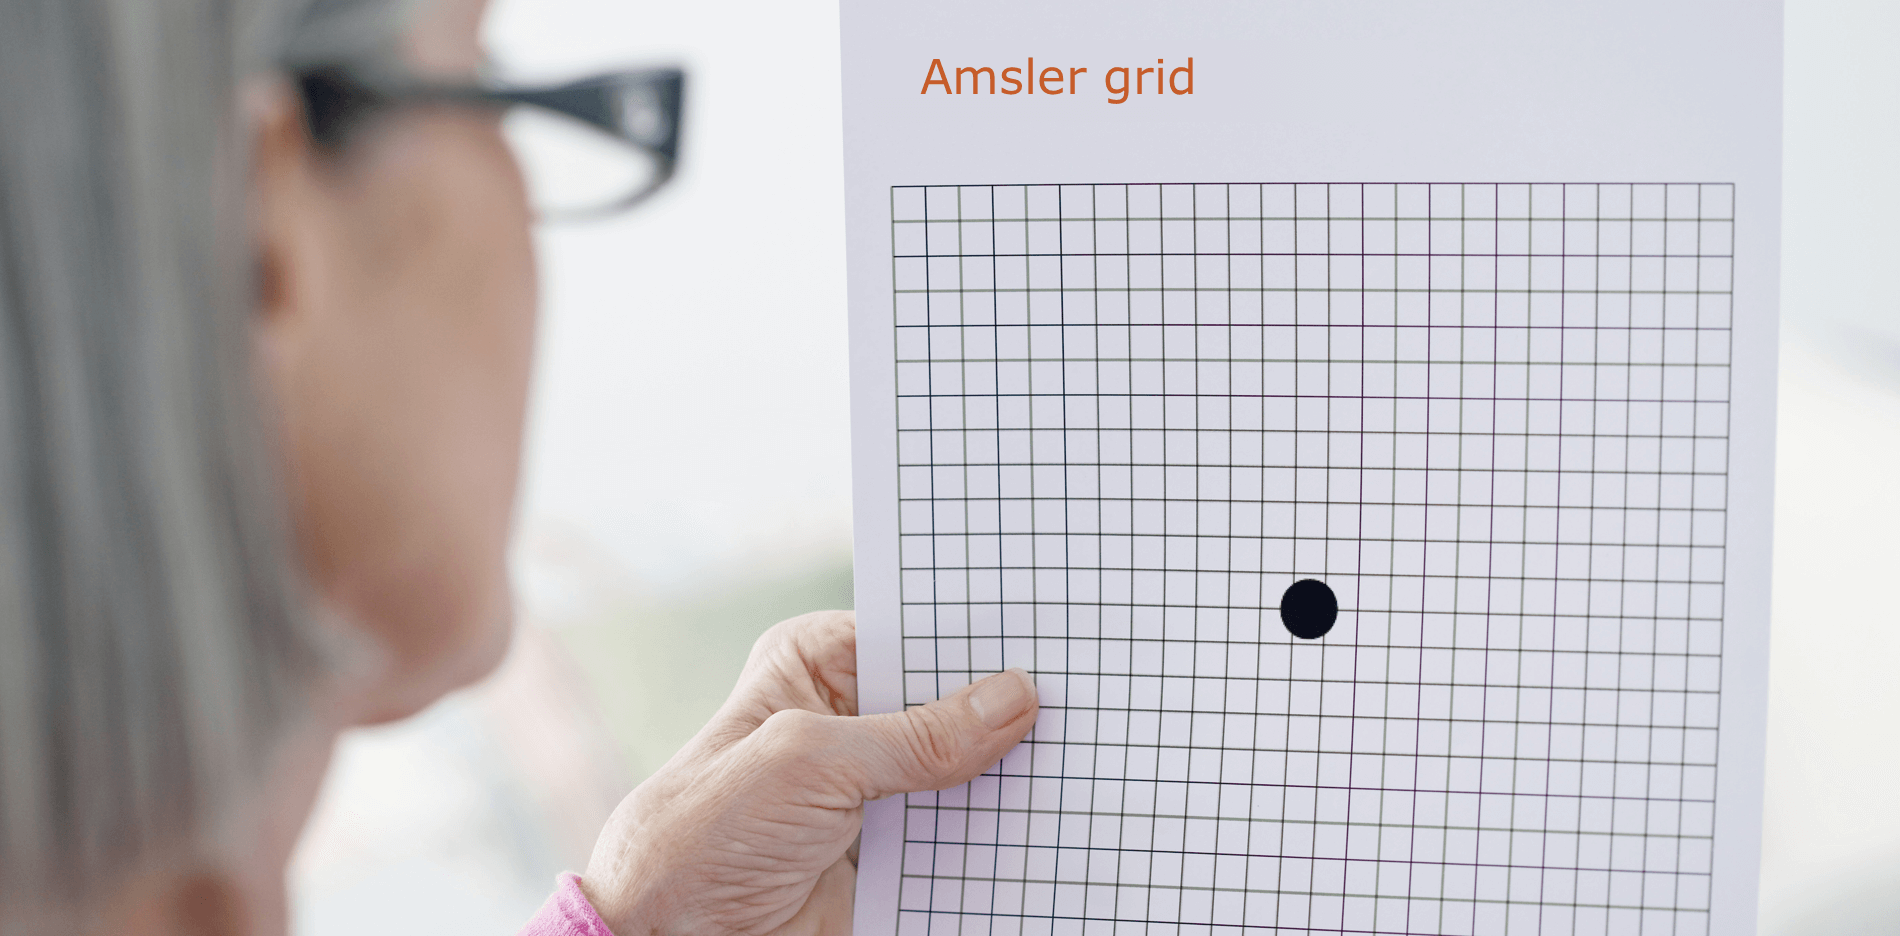 A woman wearing reading glasses performs an Amsler Grid Test.